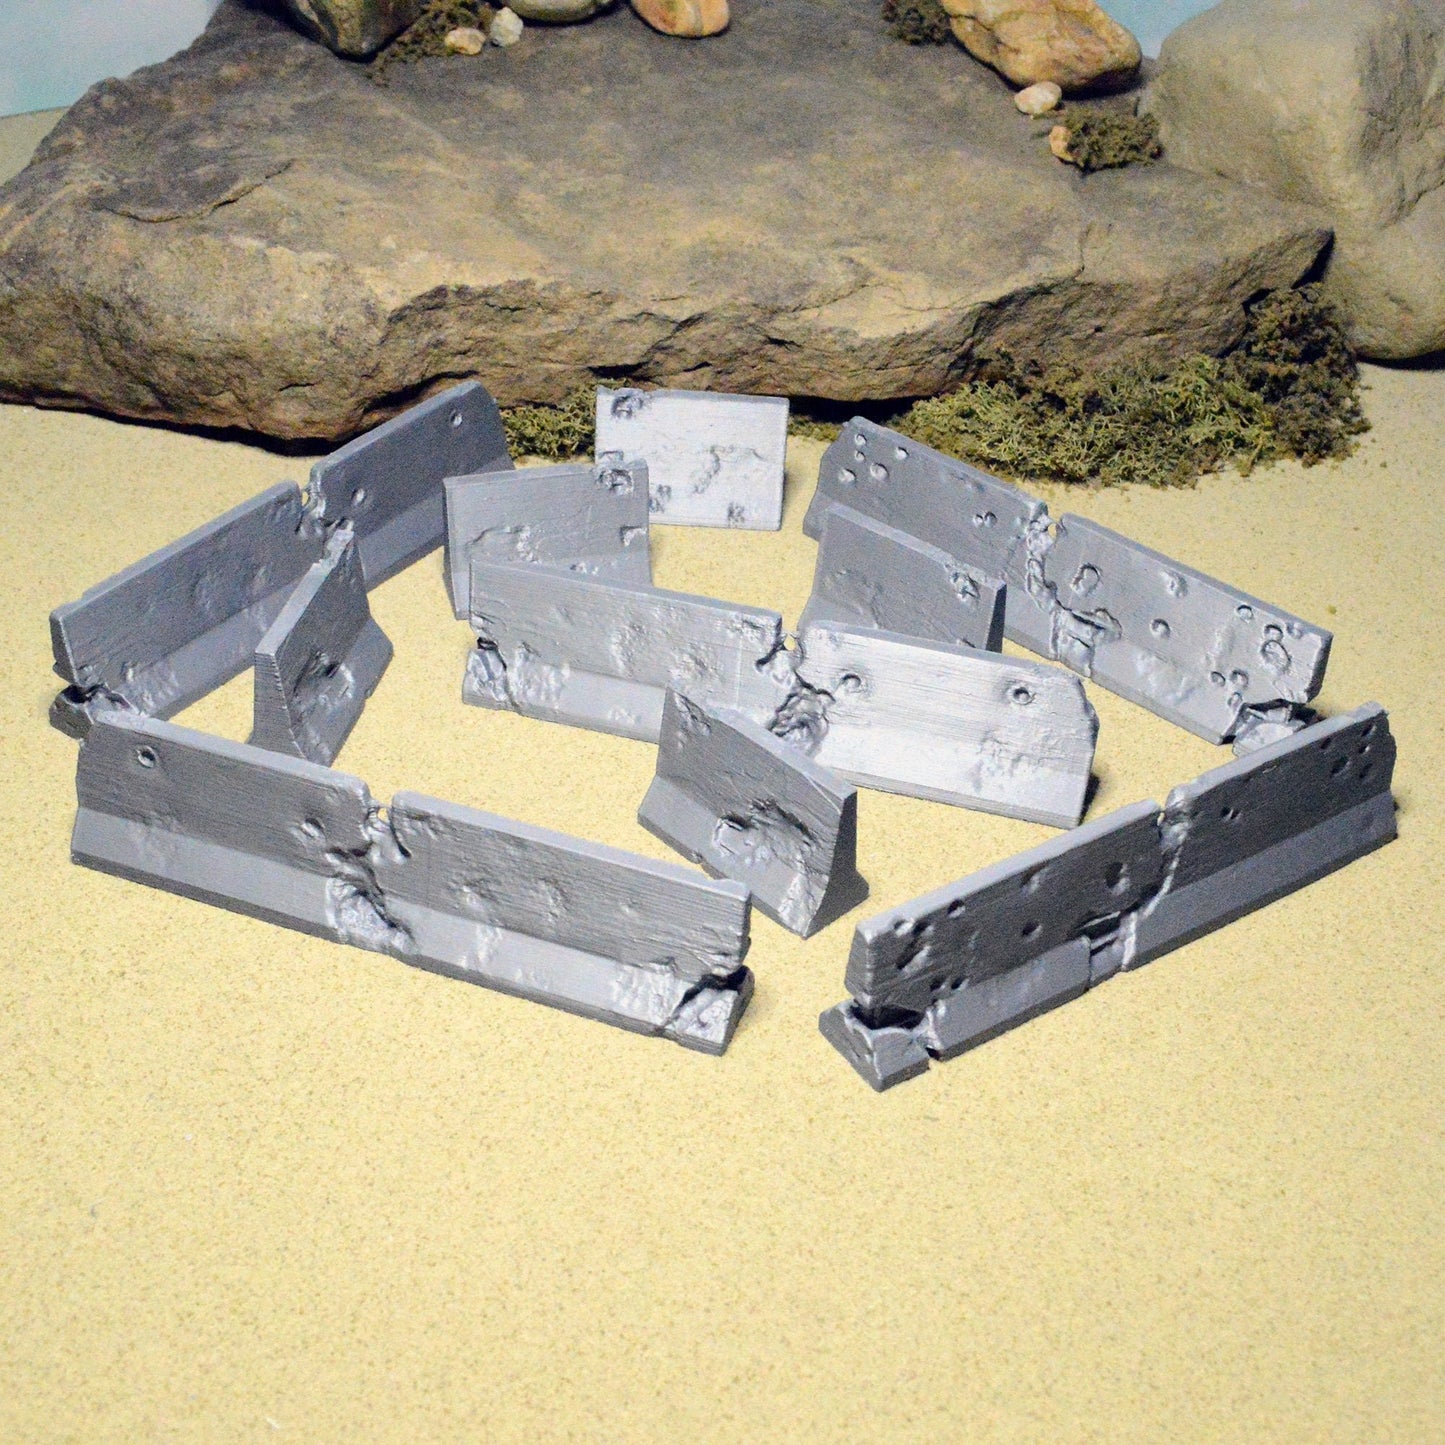 Miniature Jersey Barriers for Gaslands Terrain 15mm 20mm 28mm 32mm, Road Barriers for Urban Fallout Post-Apocalyptic, City Street Barricades